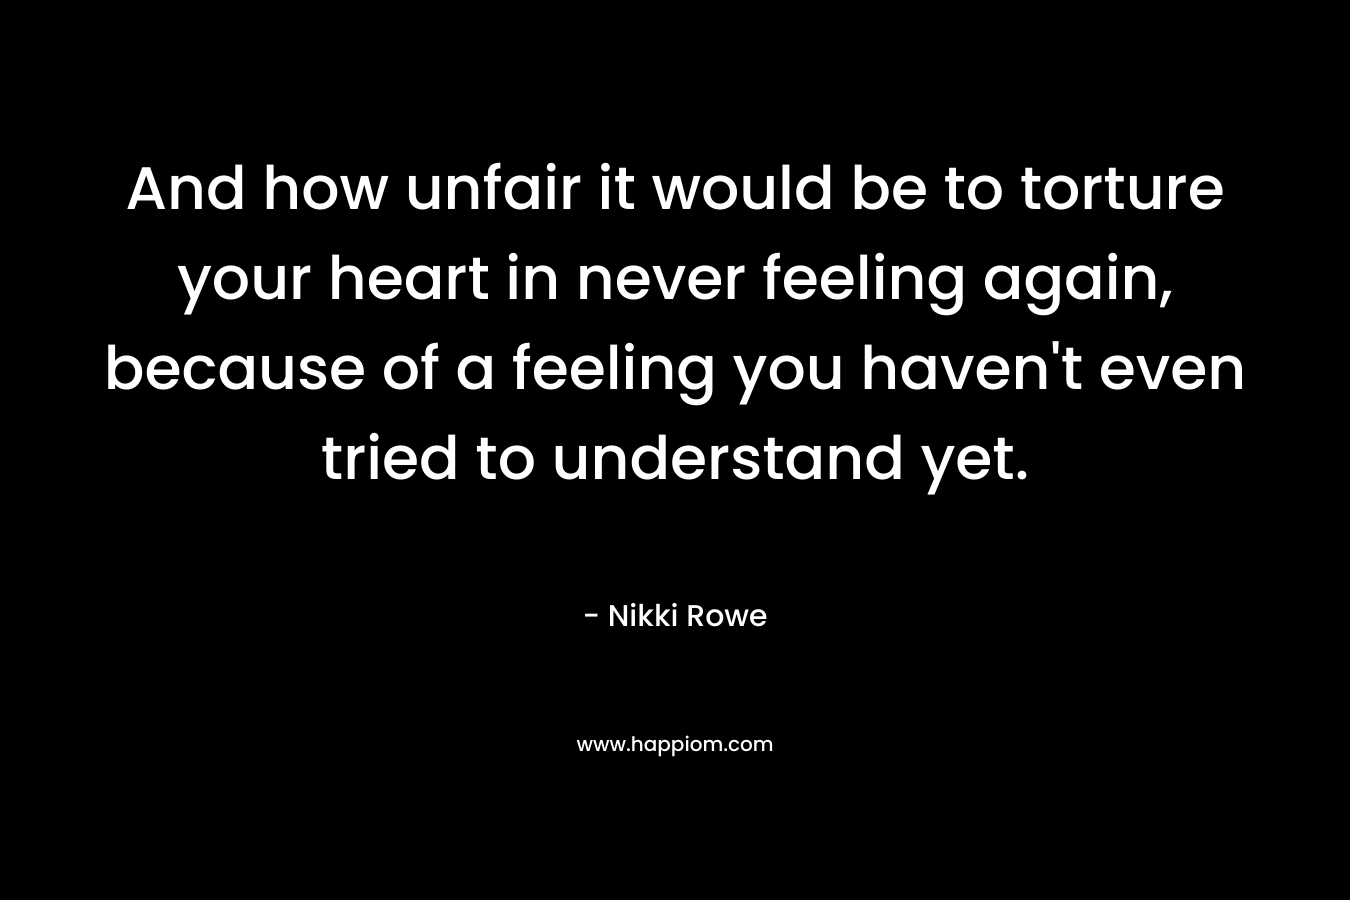 And how unfair it would be to torture your heart in never feeling again, because of a feeling you haven’t even tried to understand yet. – Nikki Rowe